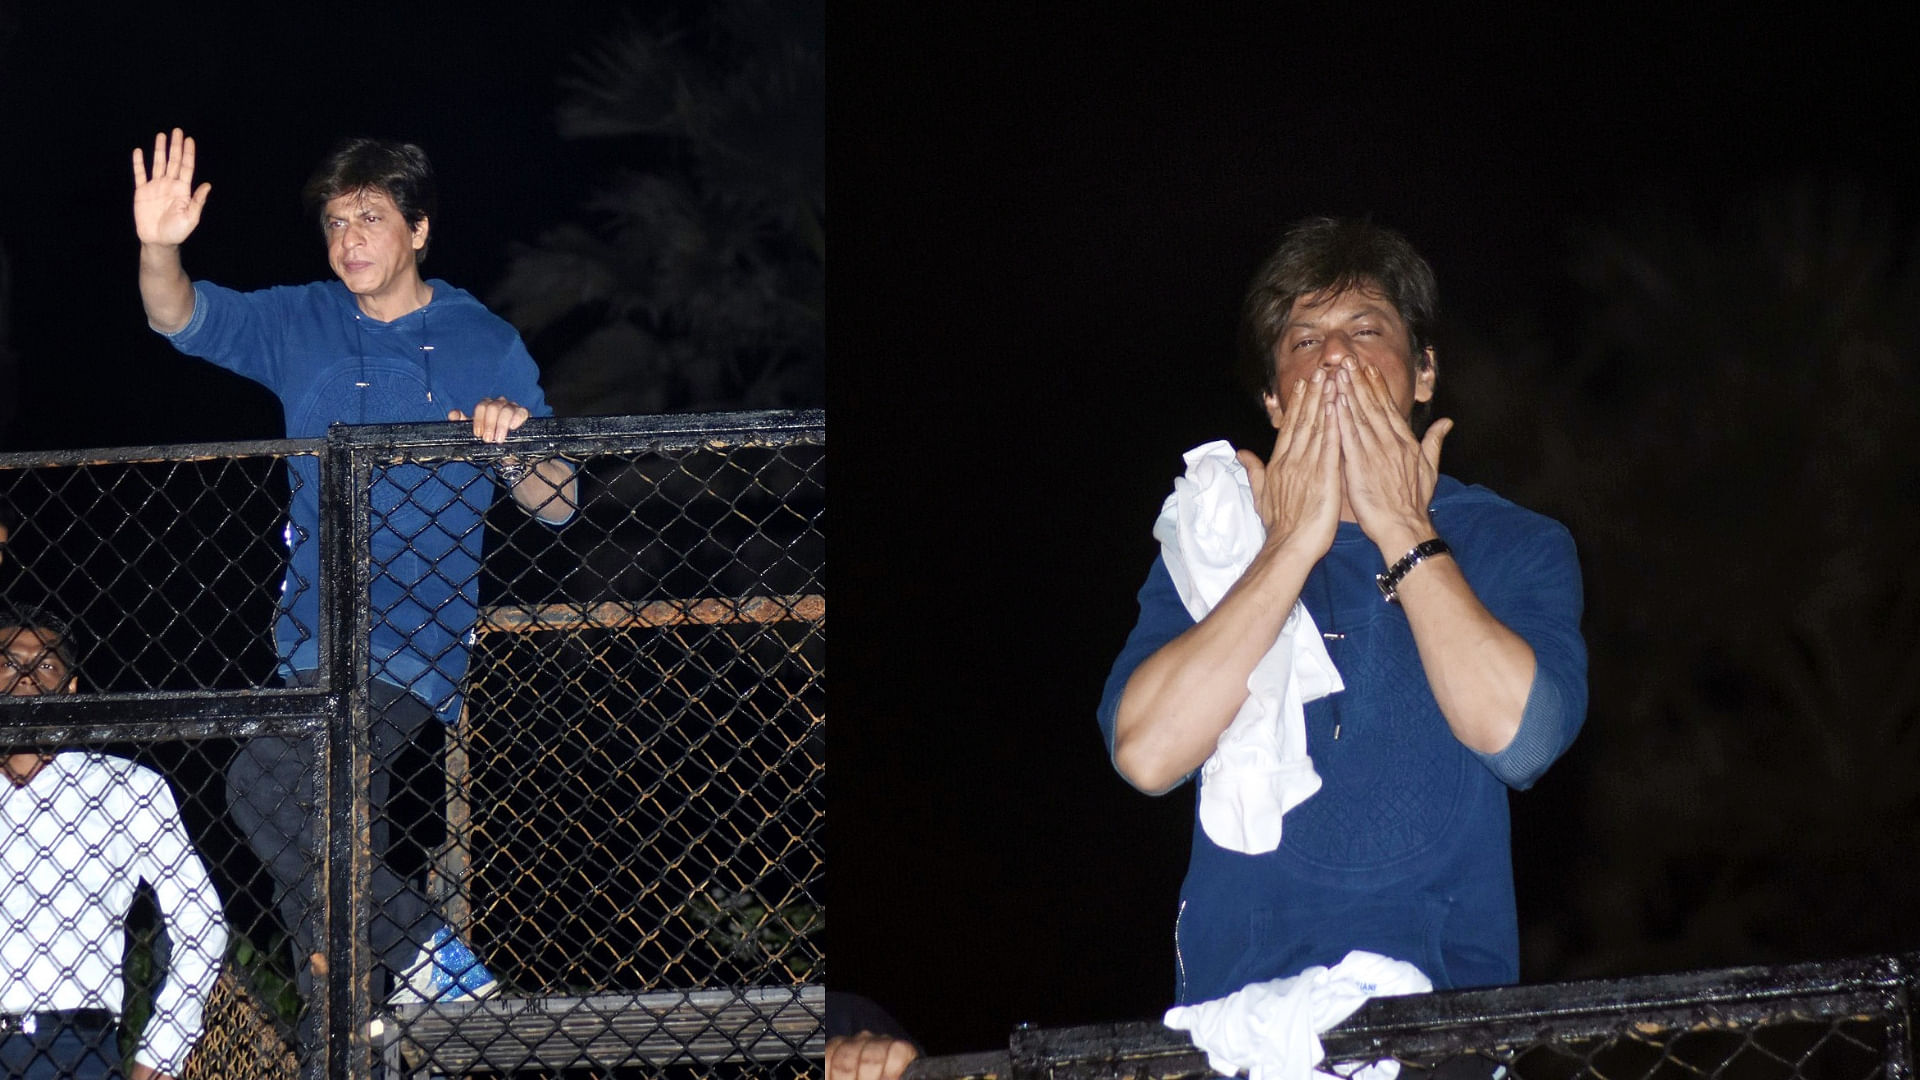 Shah Rukh Khan makes an appearance outside his residence to greet fans on his birthday.